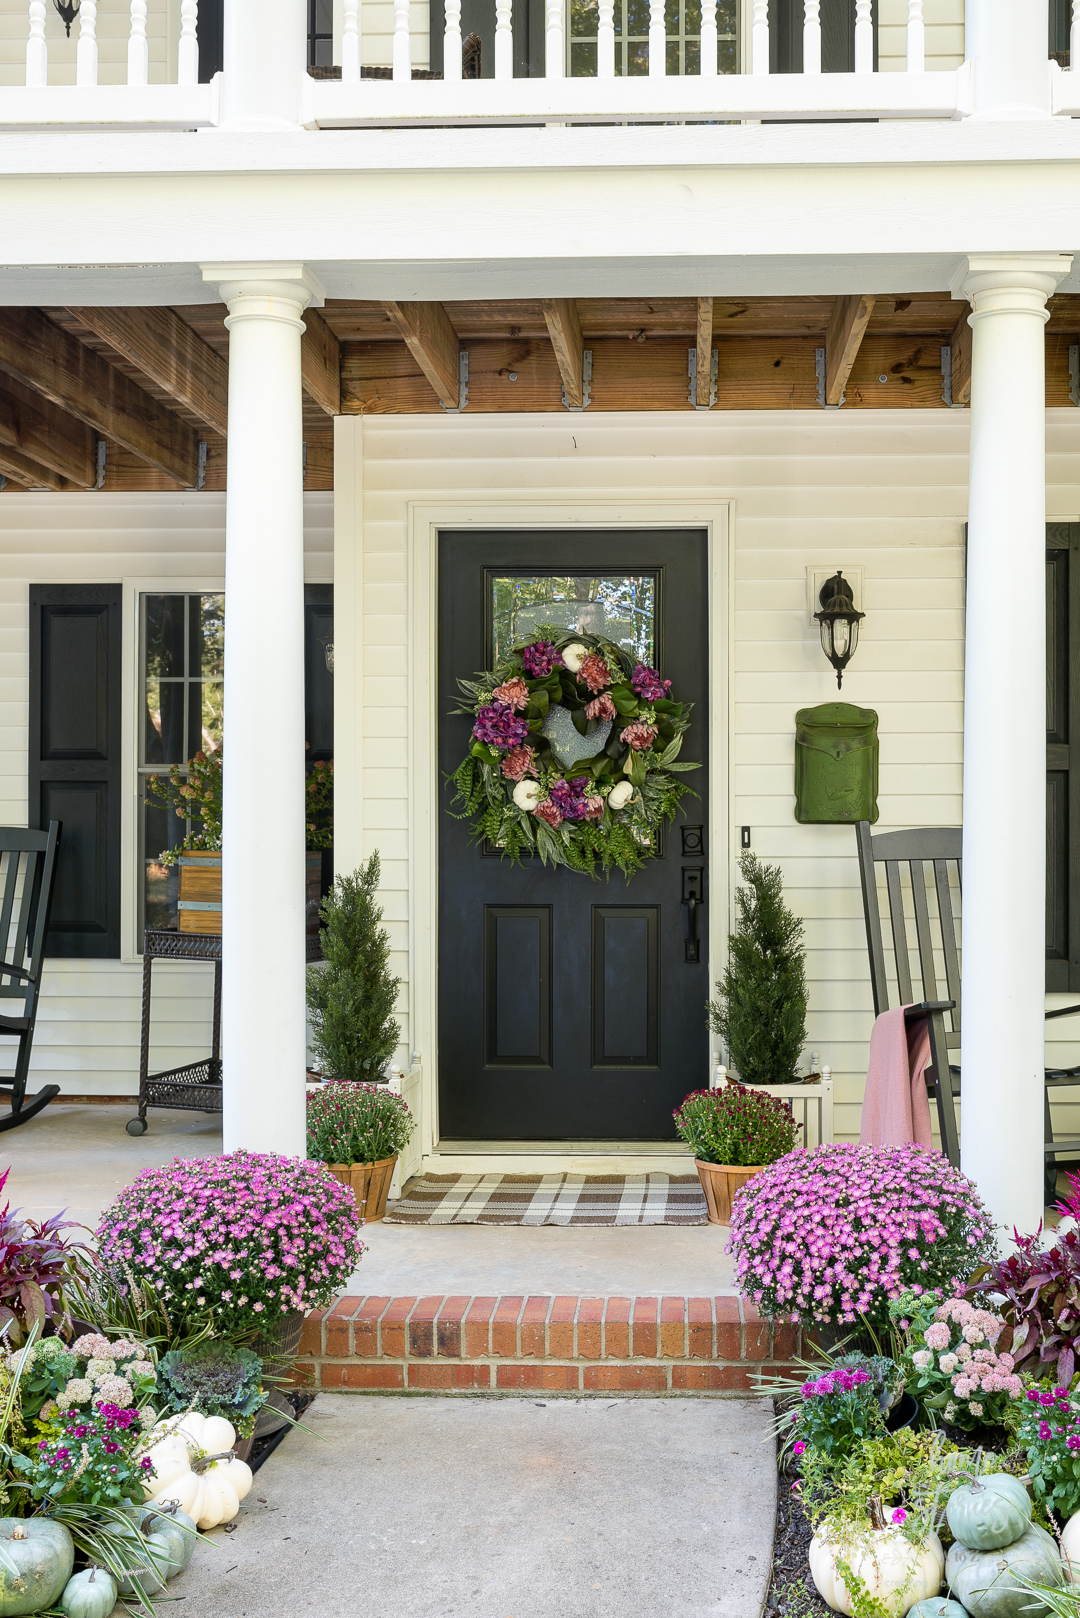 pink purple fall porch mums and decor